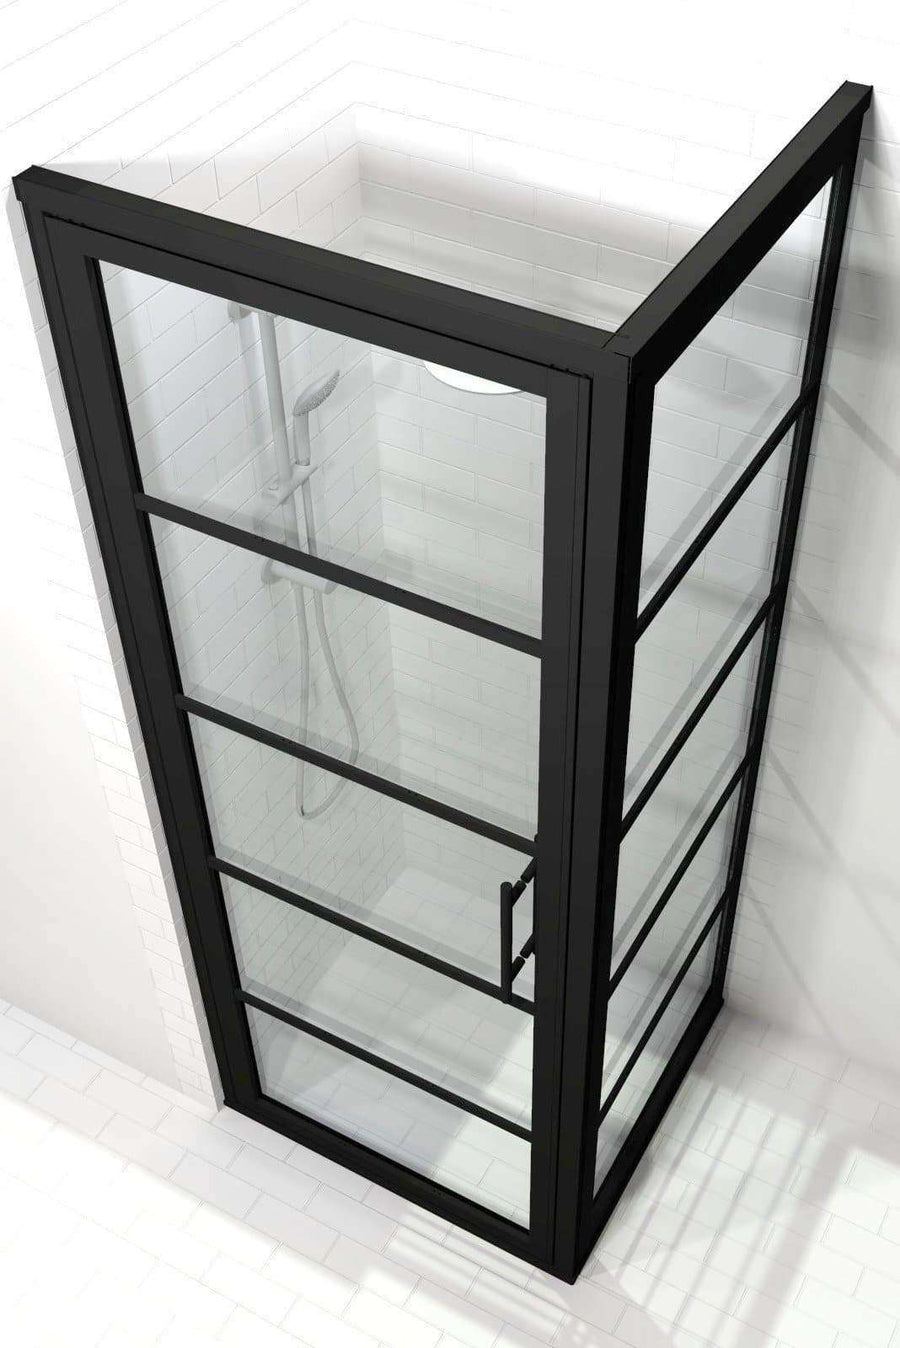 Industrial Black Frame Corner Shower Doors - Gridscape GS2 with Clear Glass by Coastal Shower Doors